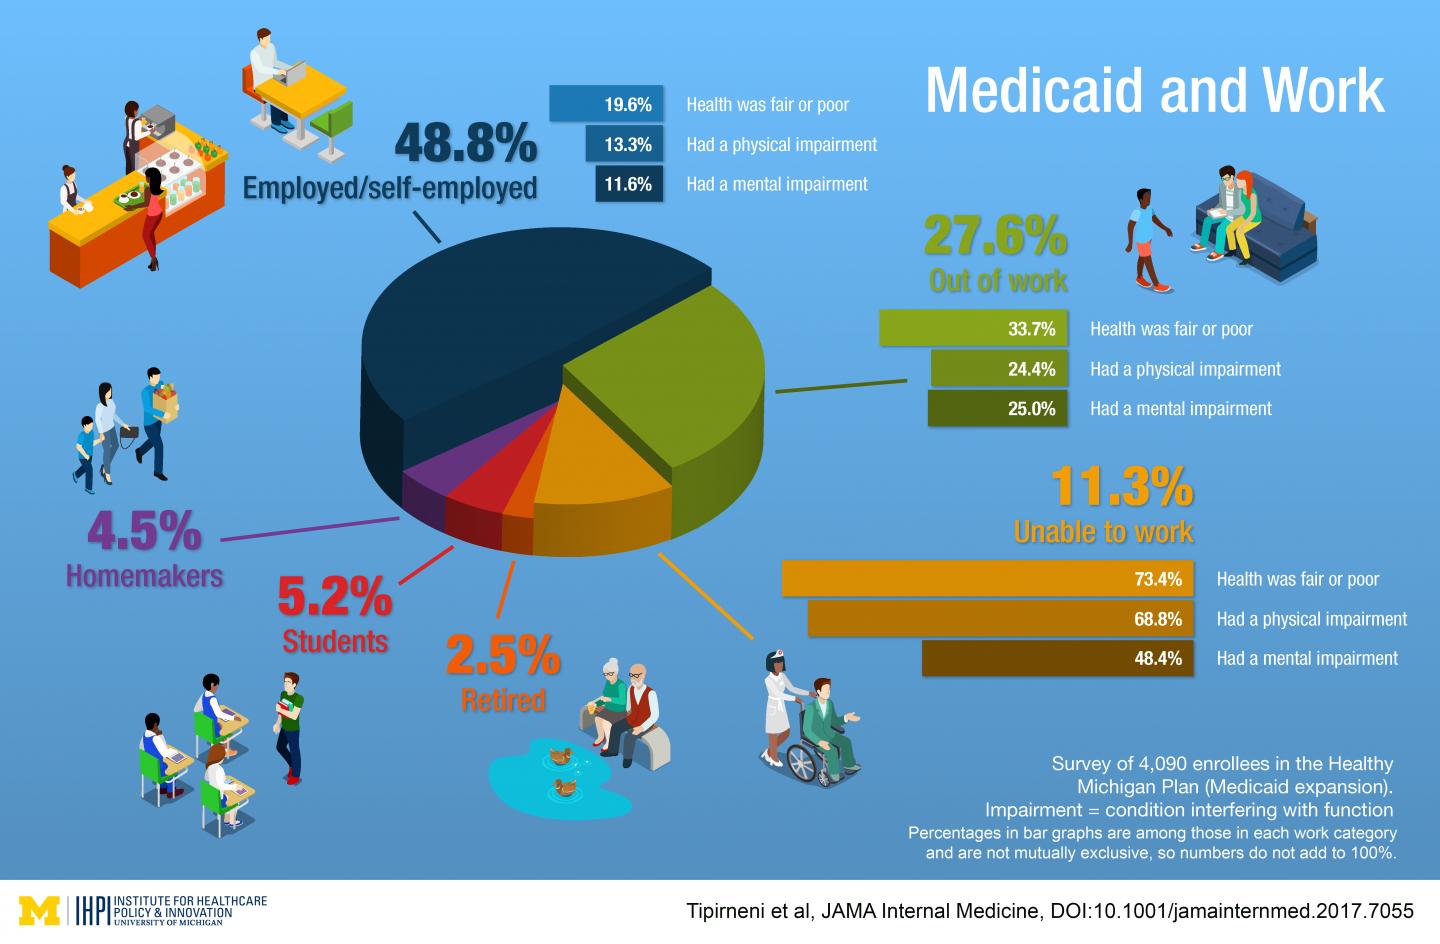 Medicaid Expansion Enrollees and Work